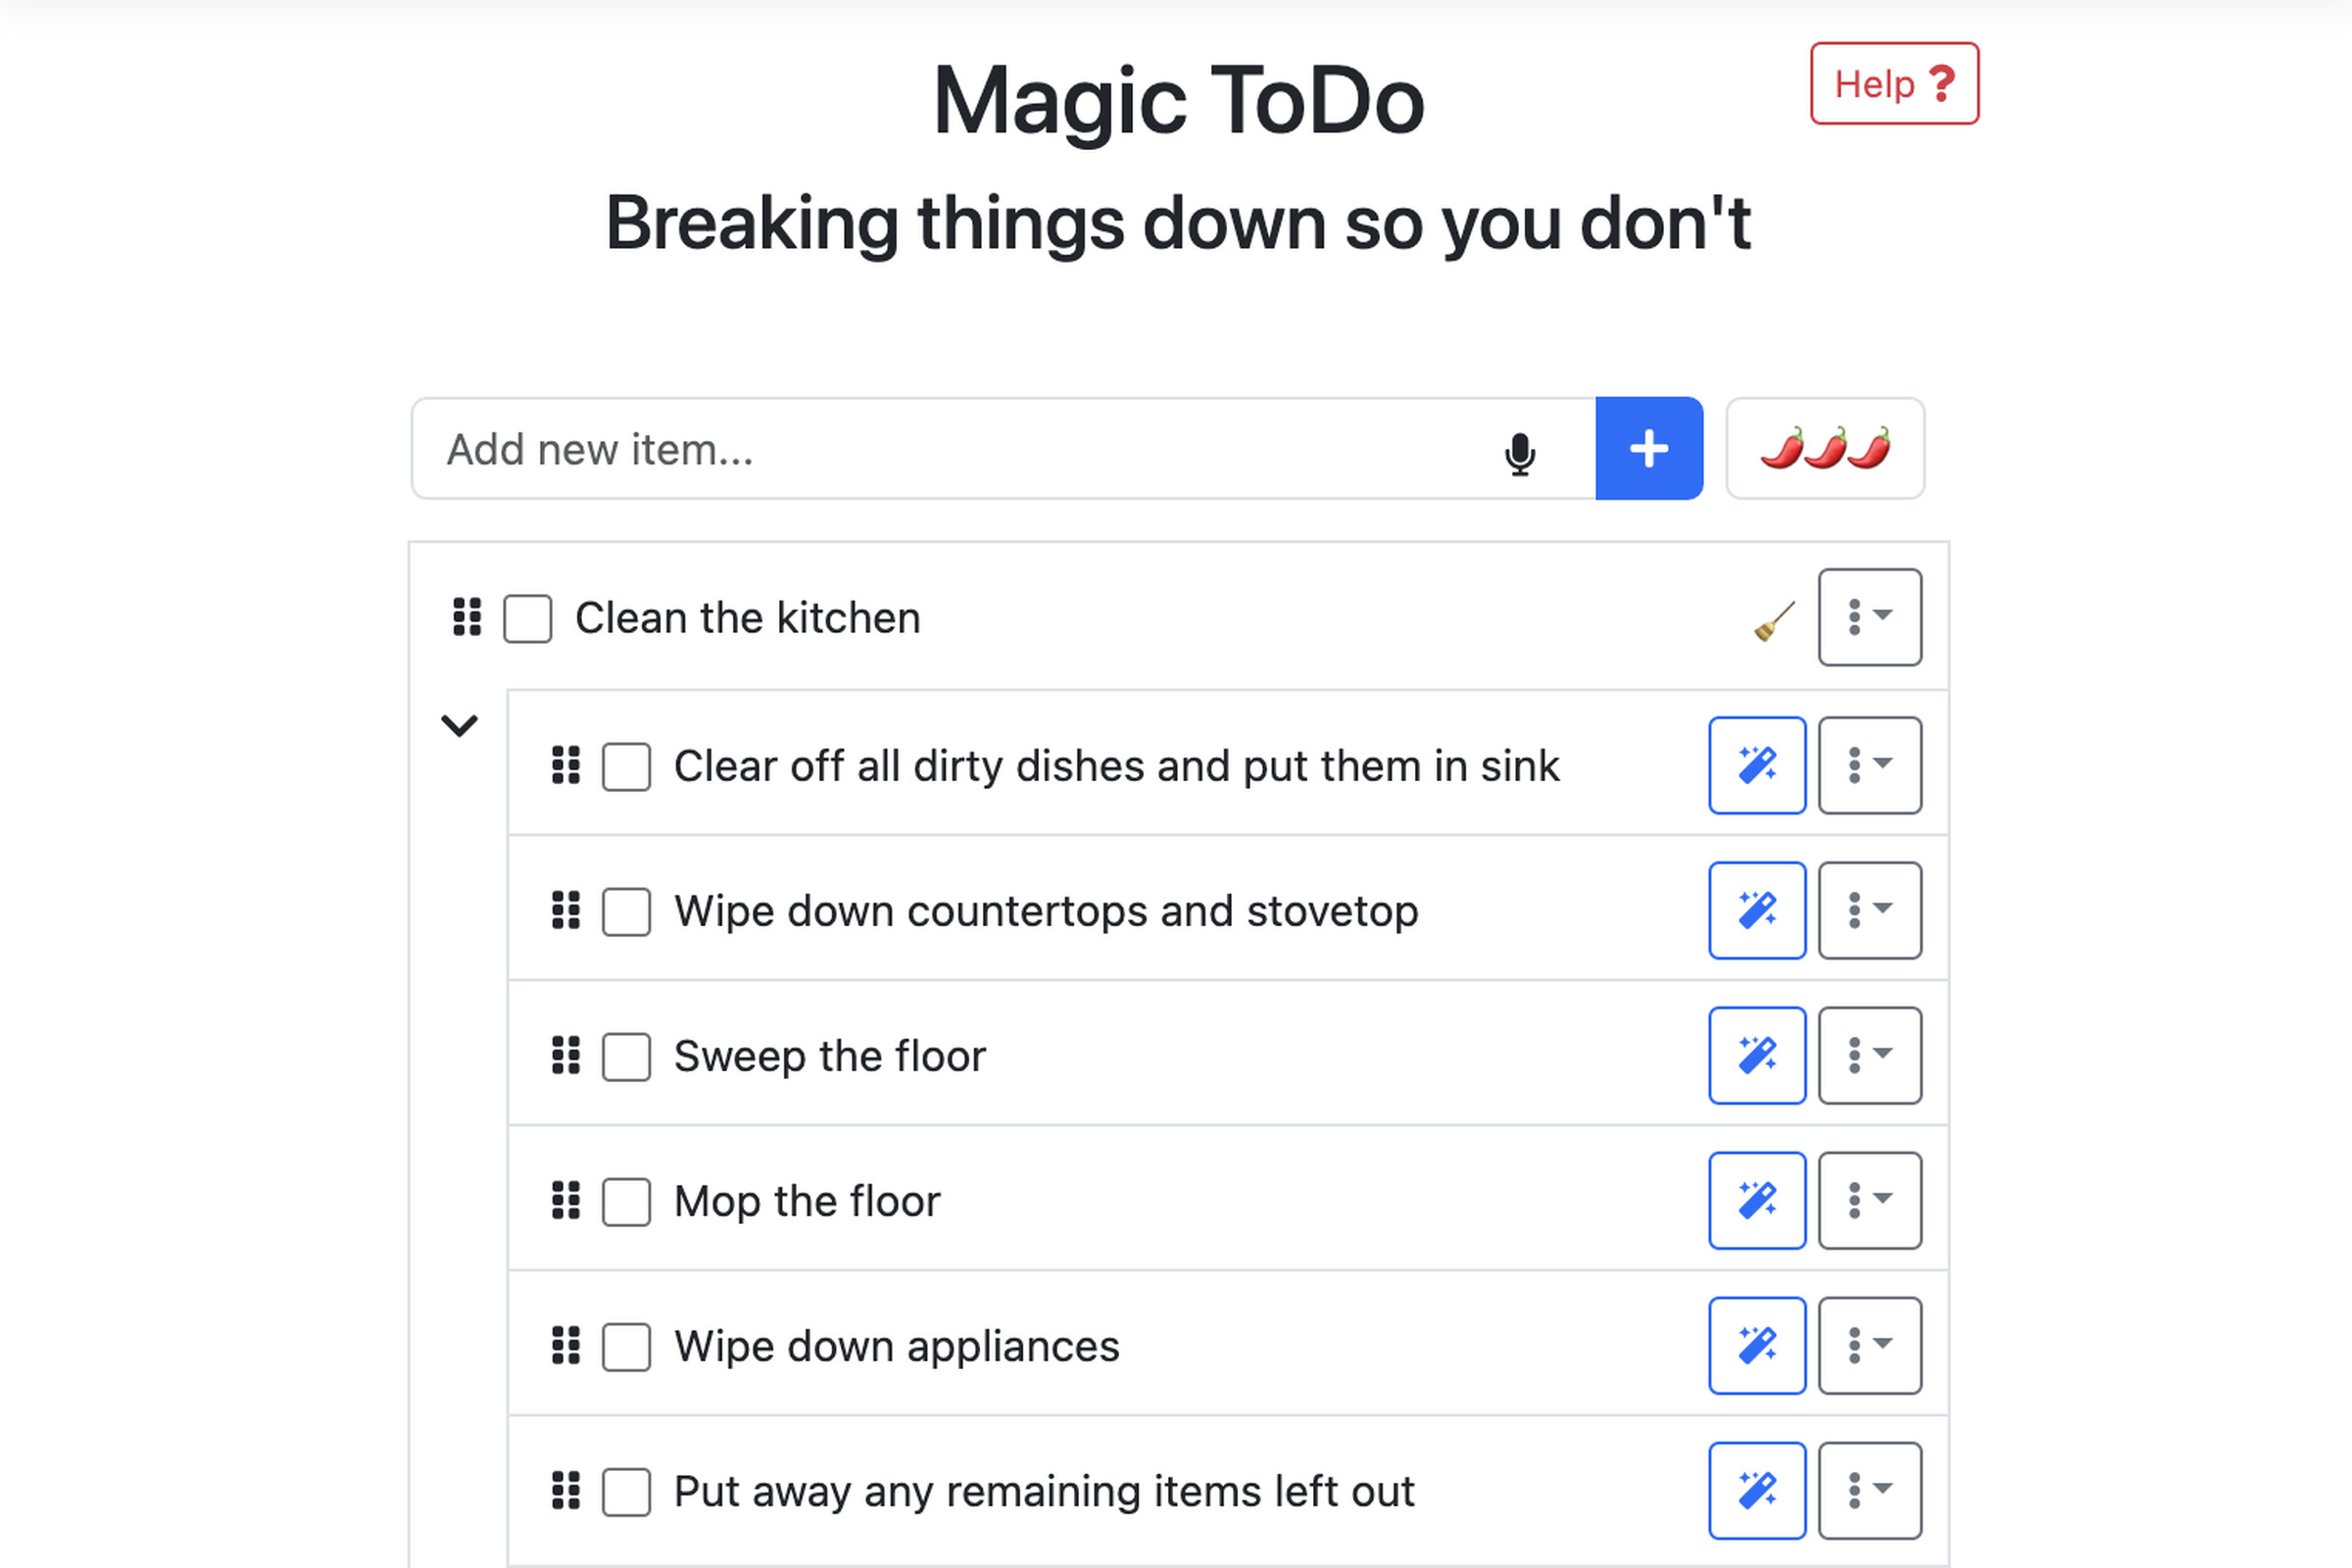 Magic To Do list of chores to clean kitchen